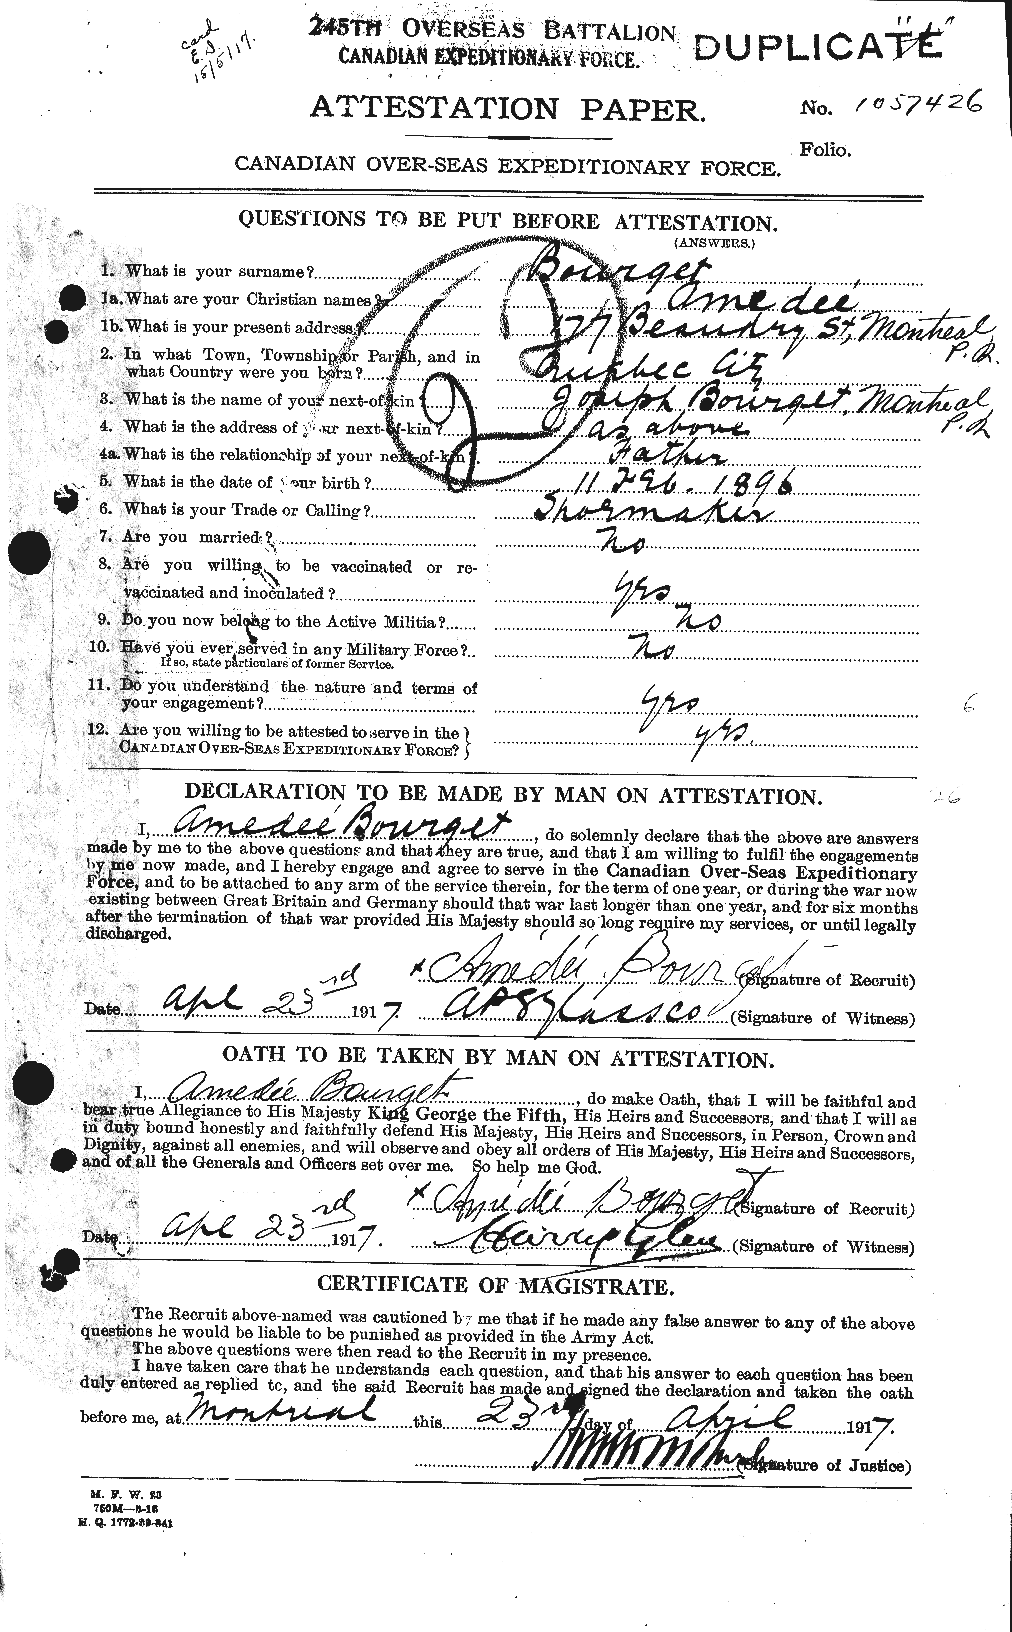 Personnel Records of the First World War - CEF 253949a